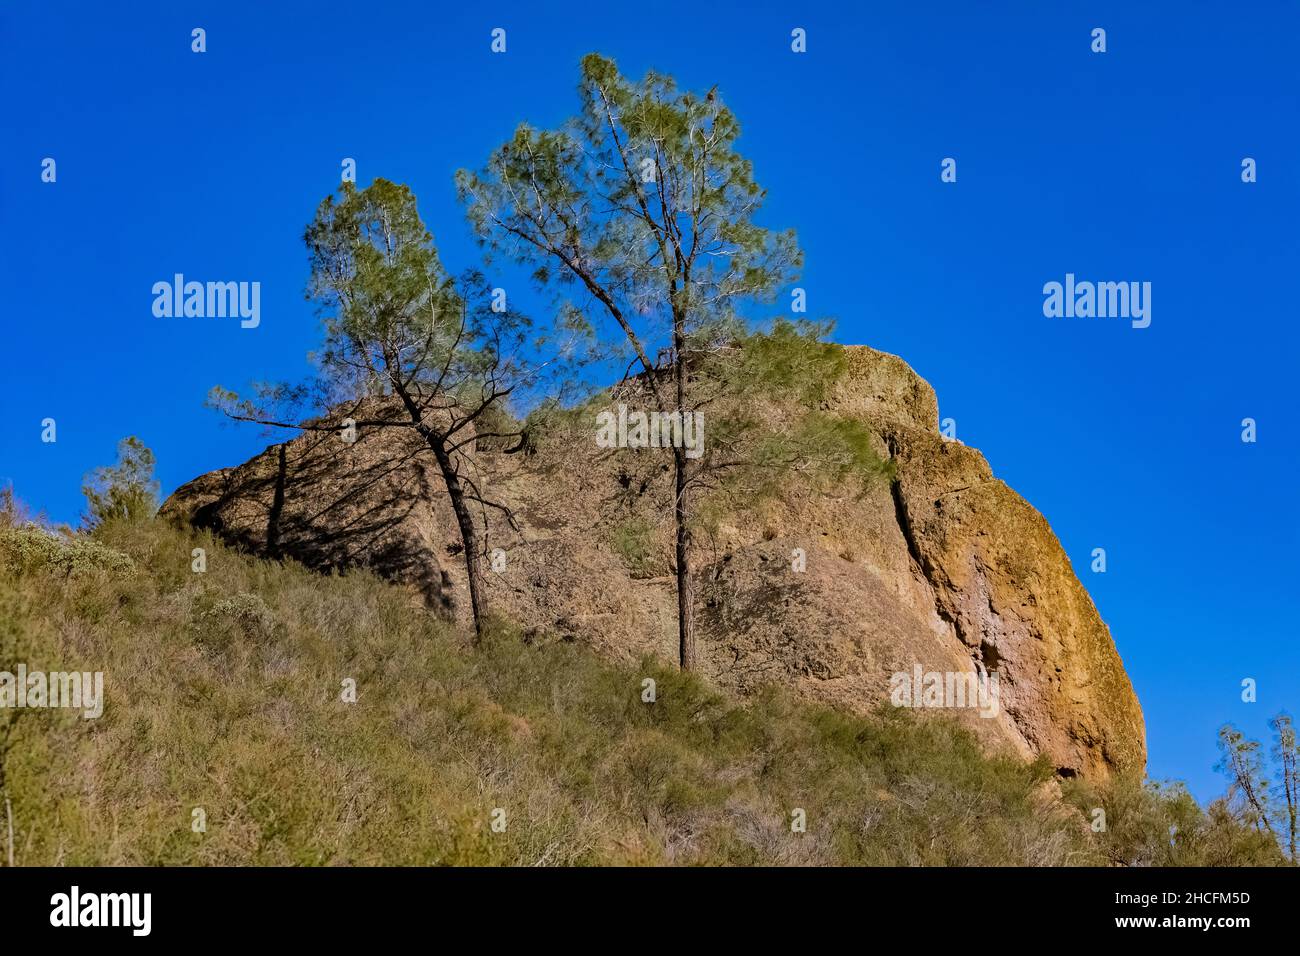 Gray Pine, Pinus sabiniana, and breccia formations in the High Peaks of Pinnacles National Park, California, USA Stock Photo